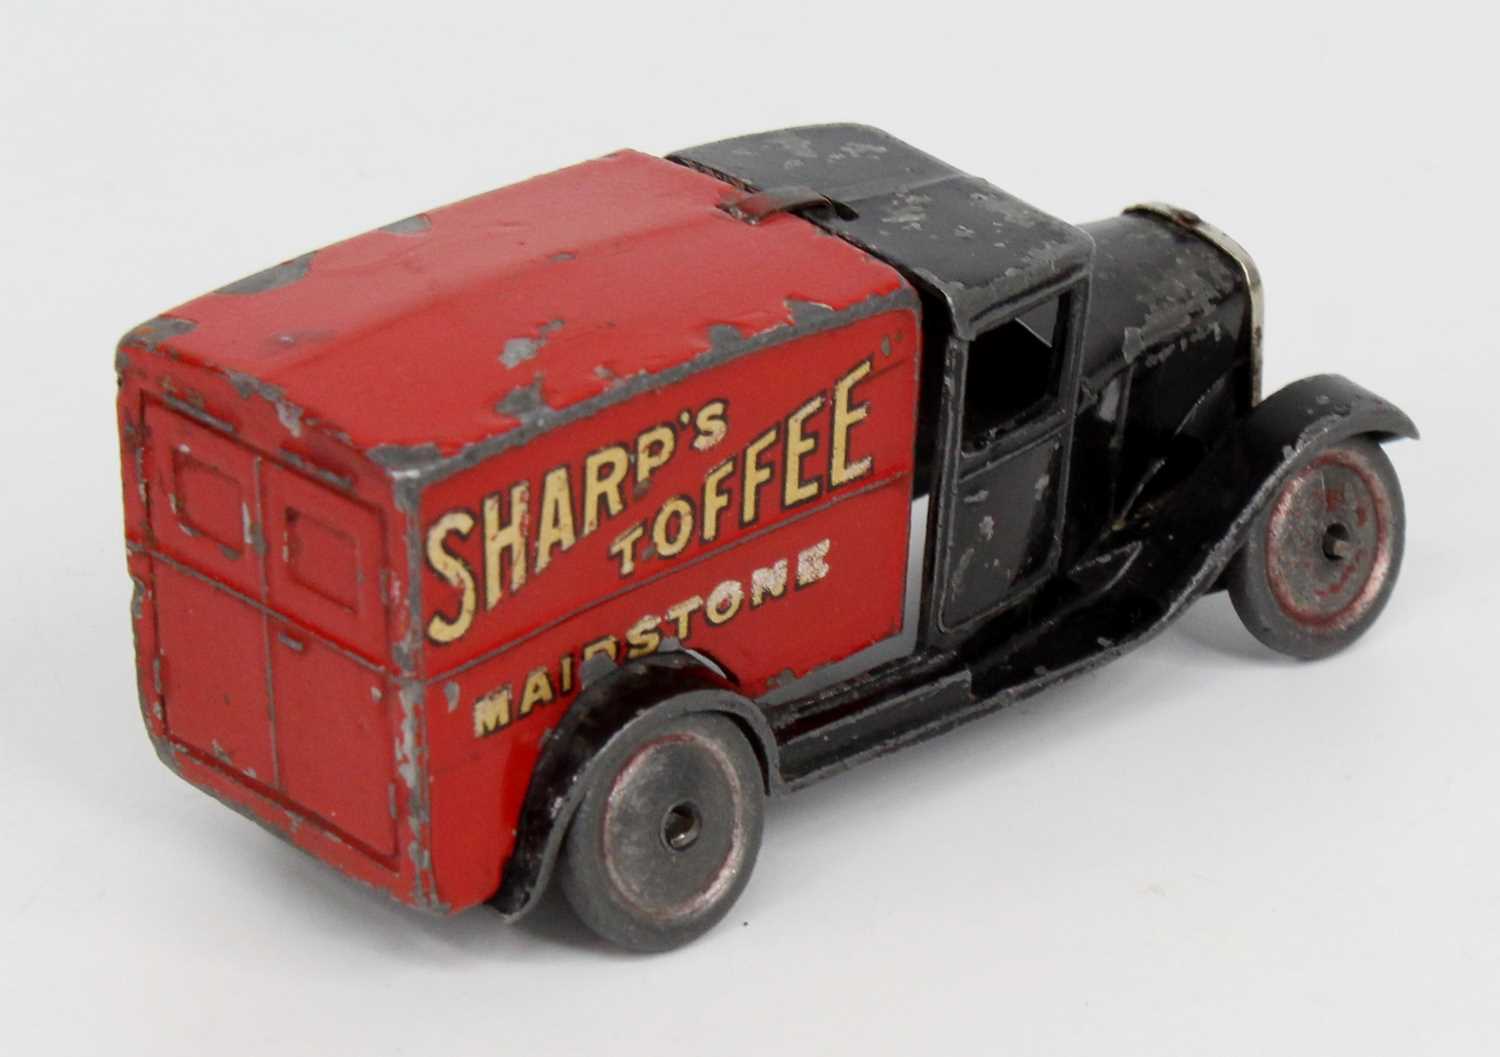 Dinky Toys, 28H pre-war delivery van, 'Sharps Toffee Maidstone' type 1 example, Dinky Toys cast to - Image 3 of 5